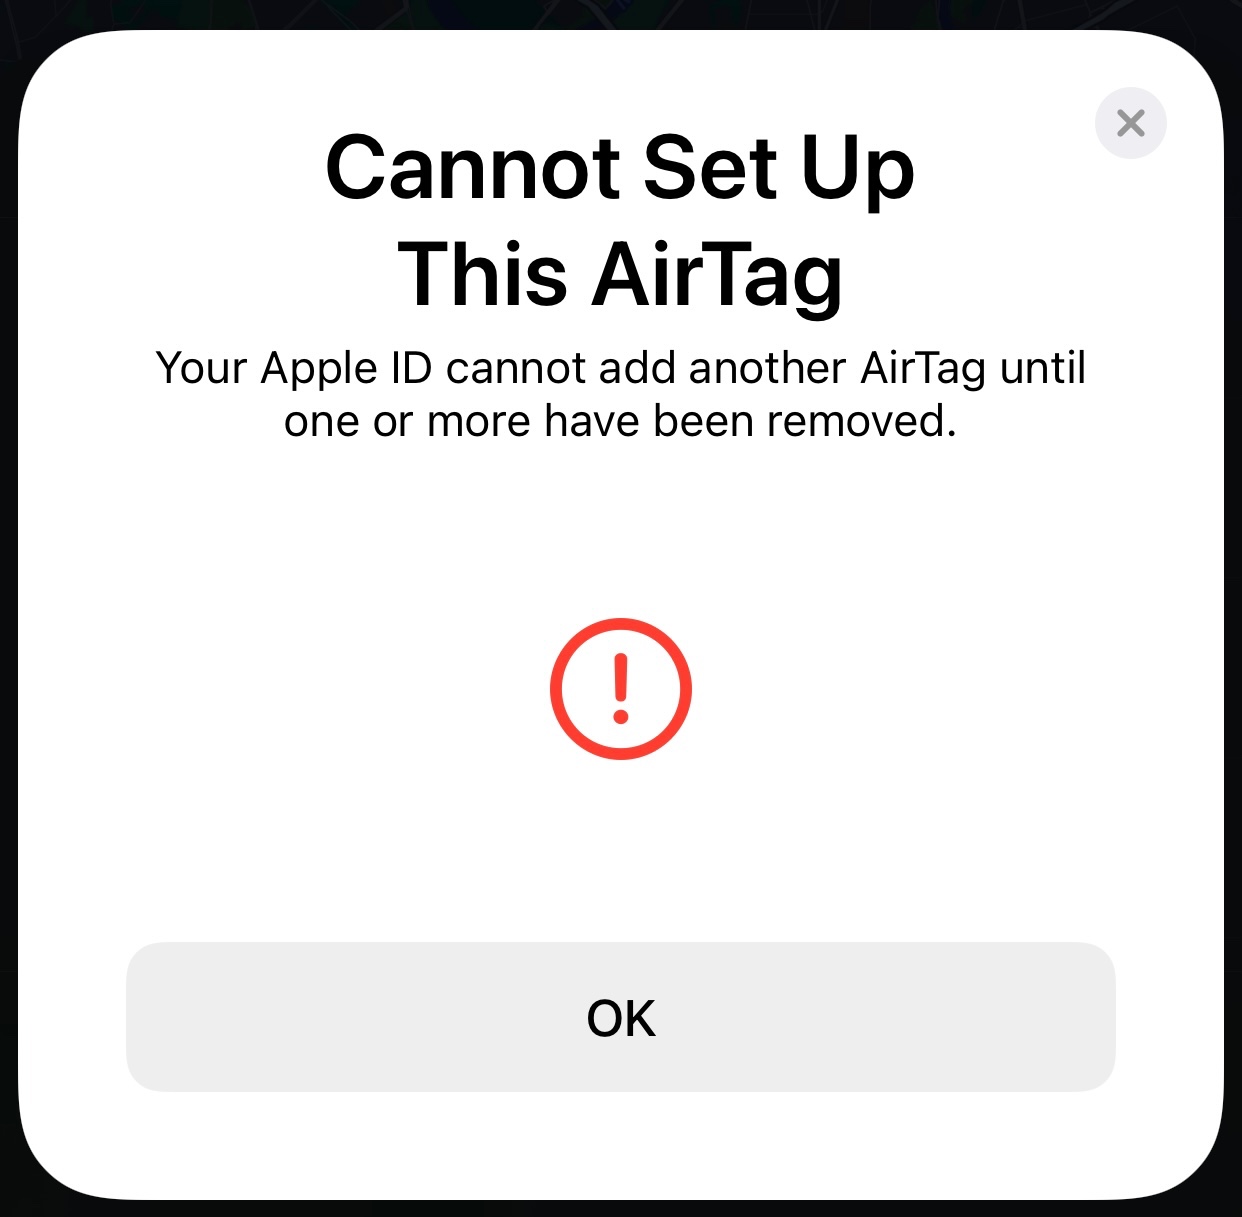 Do AirTags Work With Android and Other Non-Apple Devices?